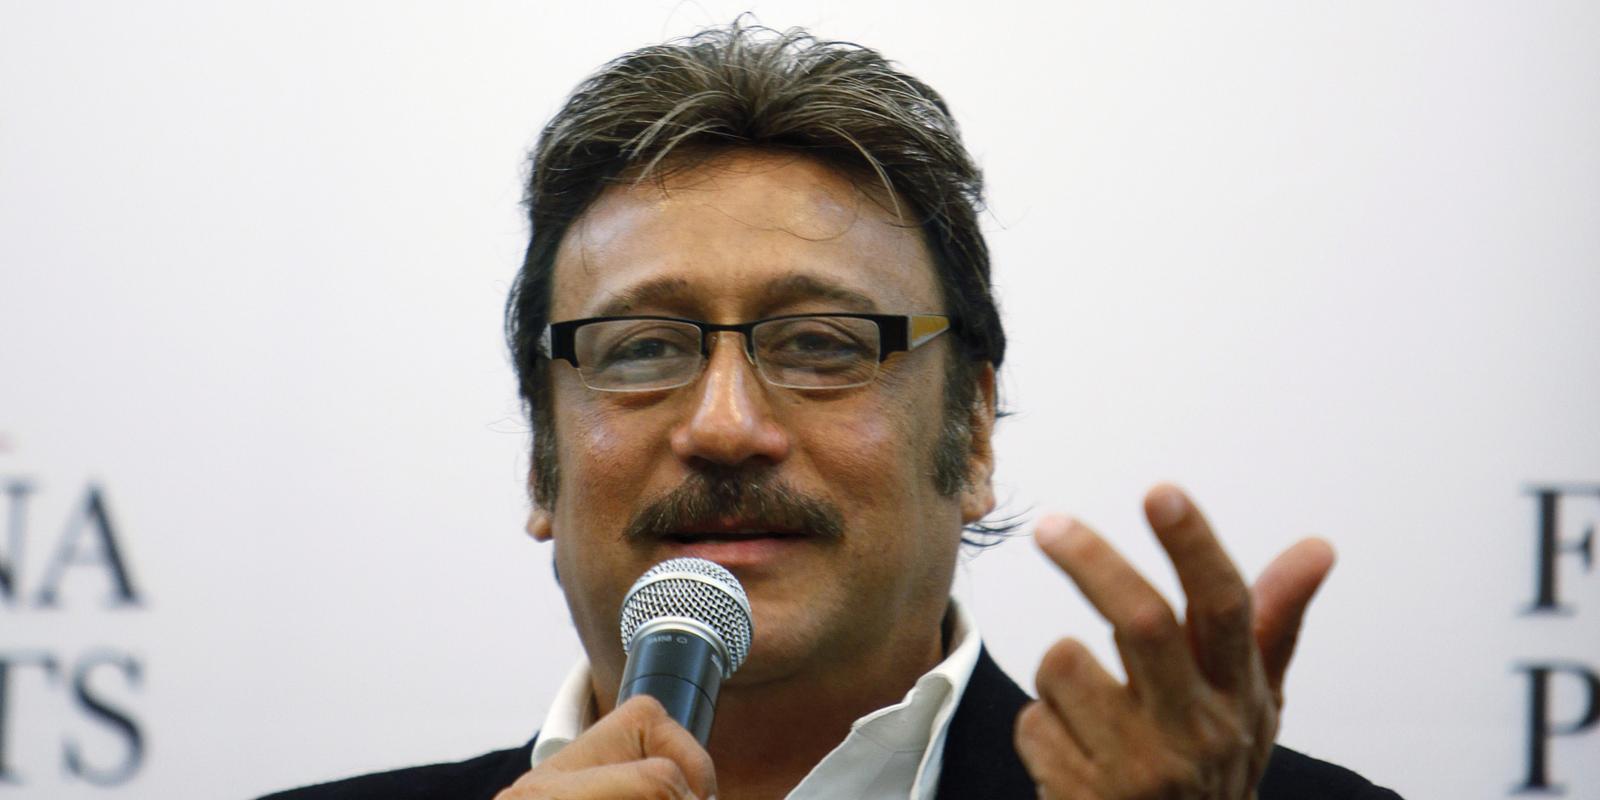 Jackie Shroff Net Worth 2022 In Indian Rupees